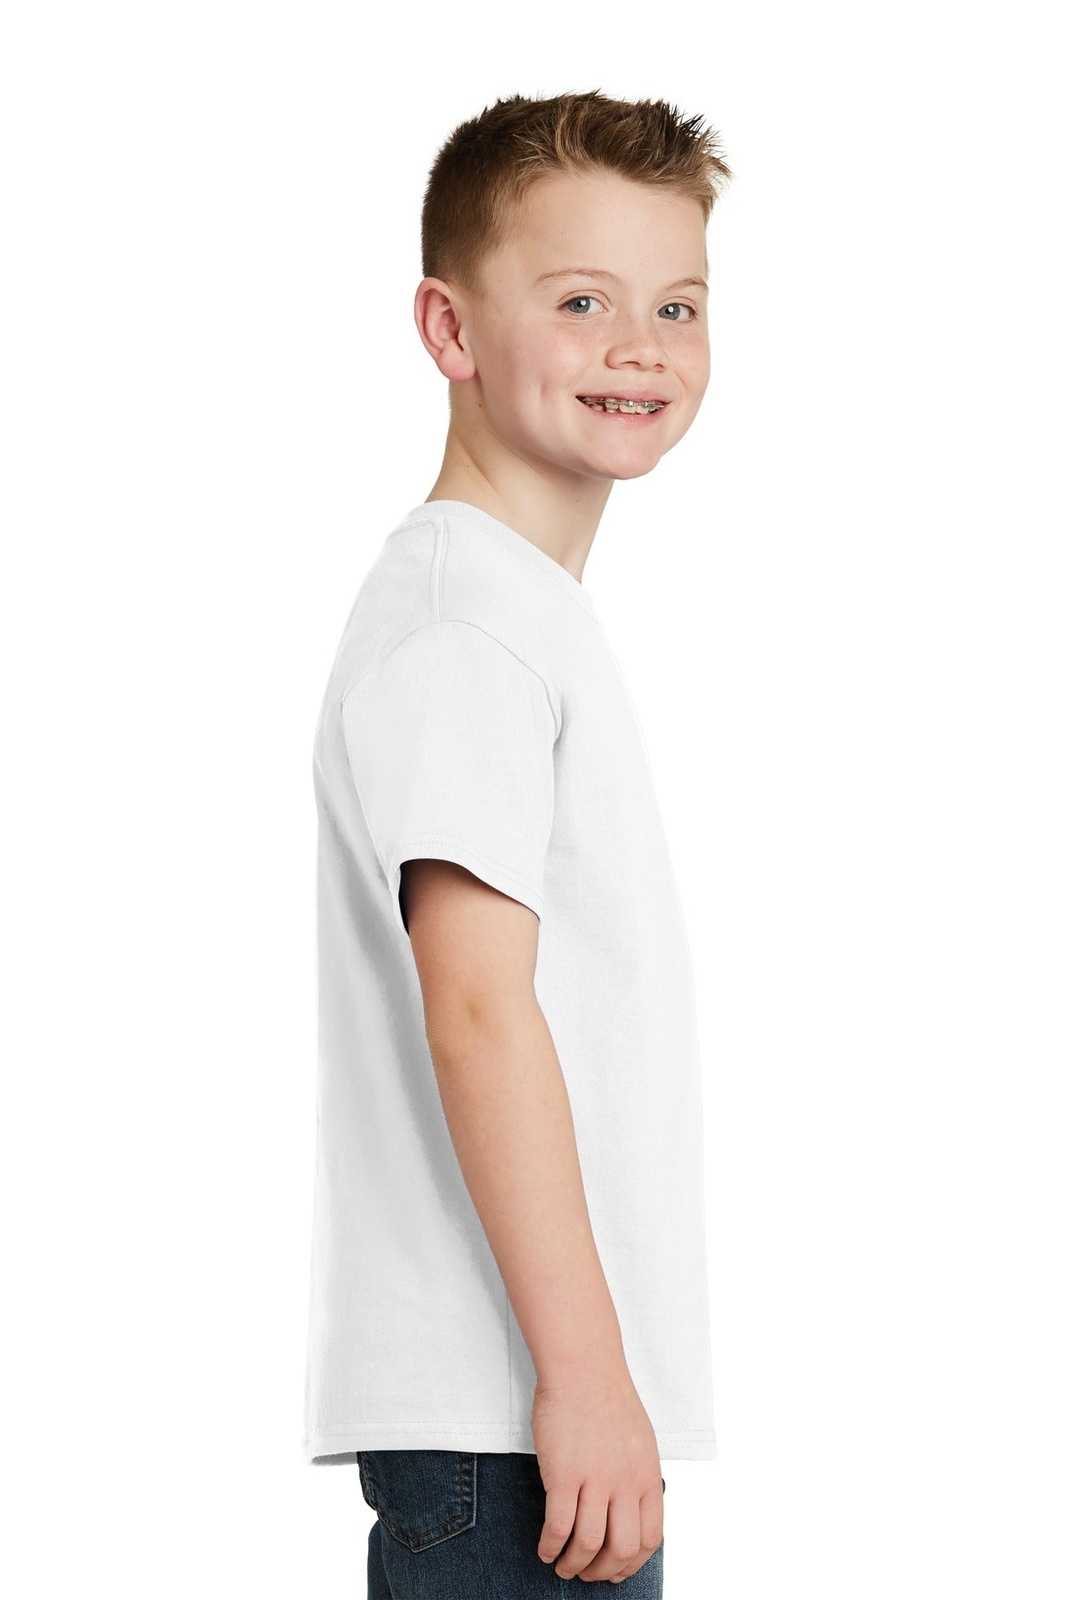 Hanes 5450 Youth Tagless 100% Cotton T-Shirt - White - HIT a Double